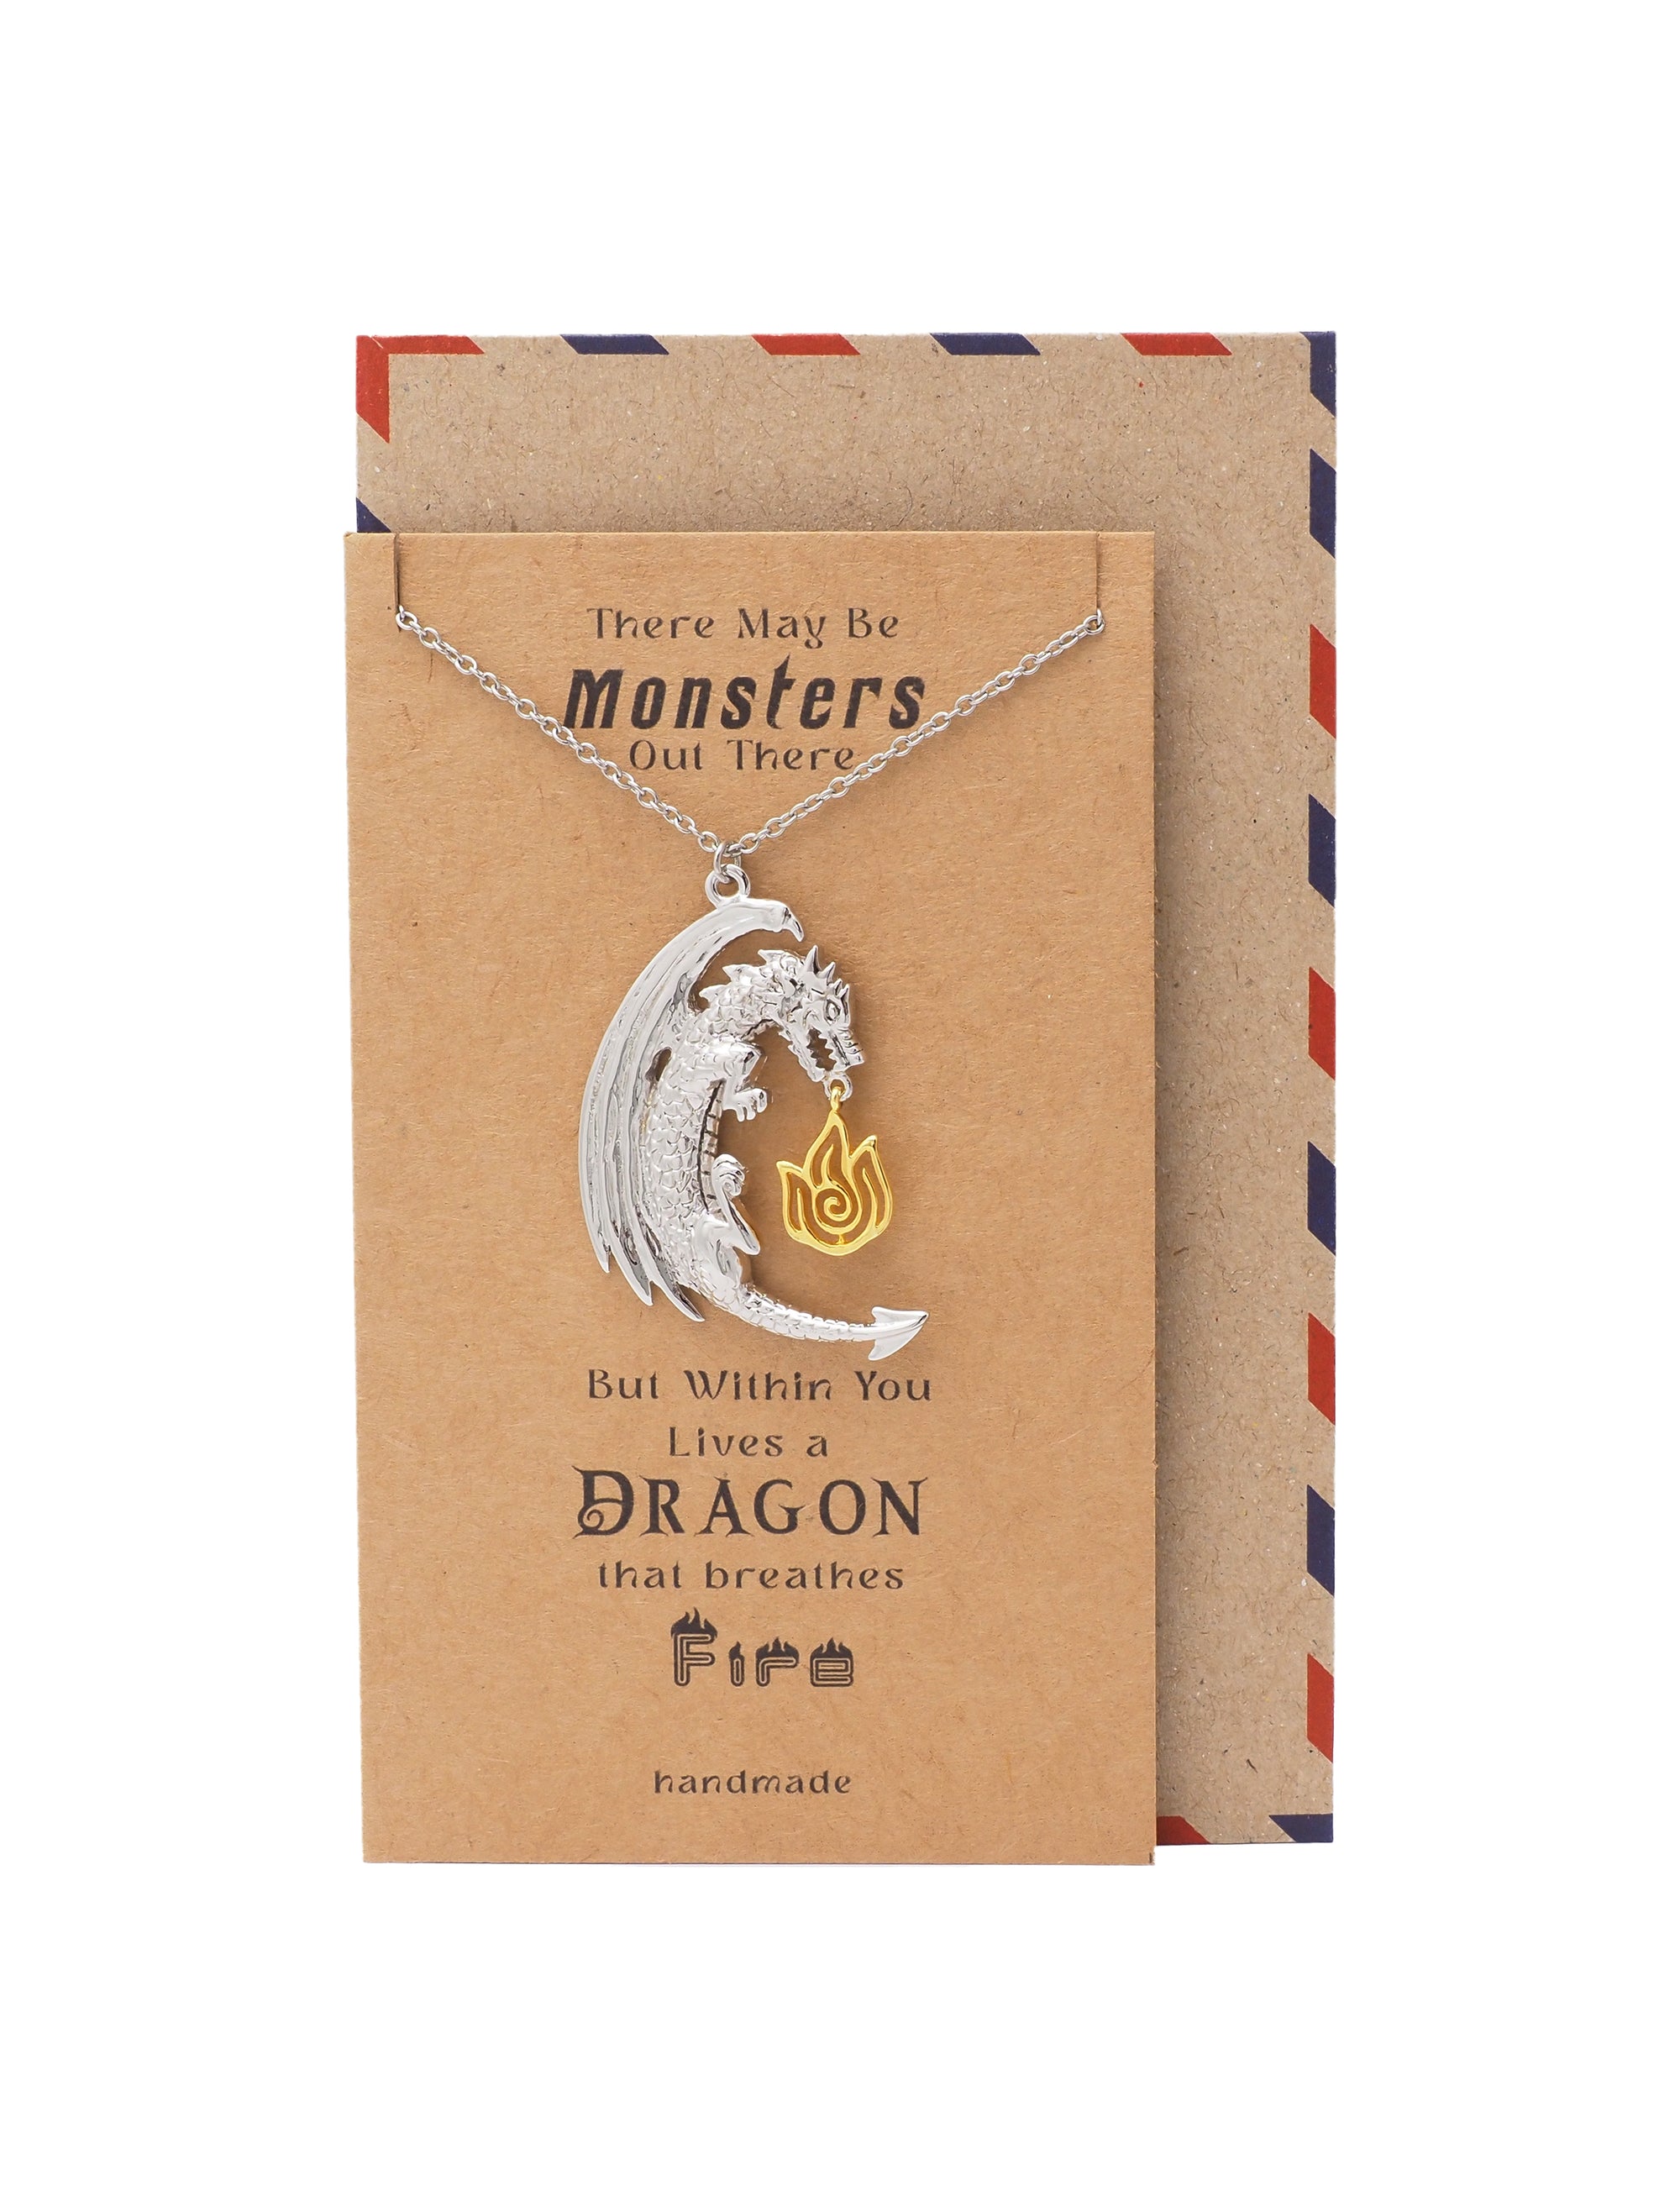 Kadence Dragon Pendant Necklace, Gifts for Women with Inspirational Quote on Greeting Card